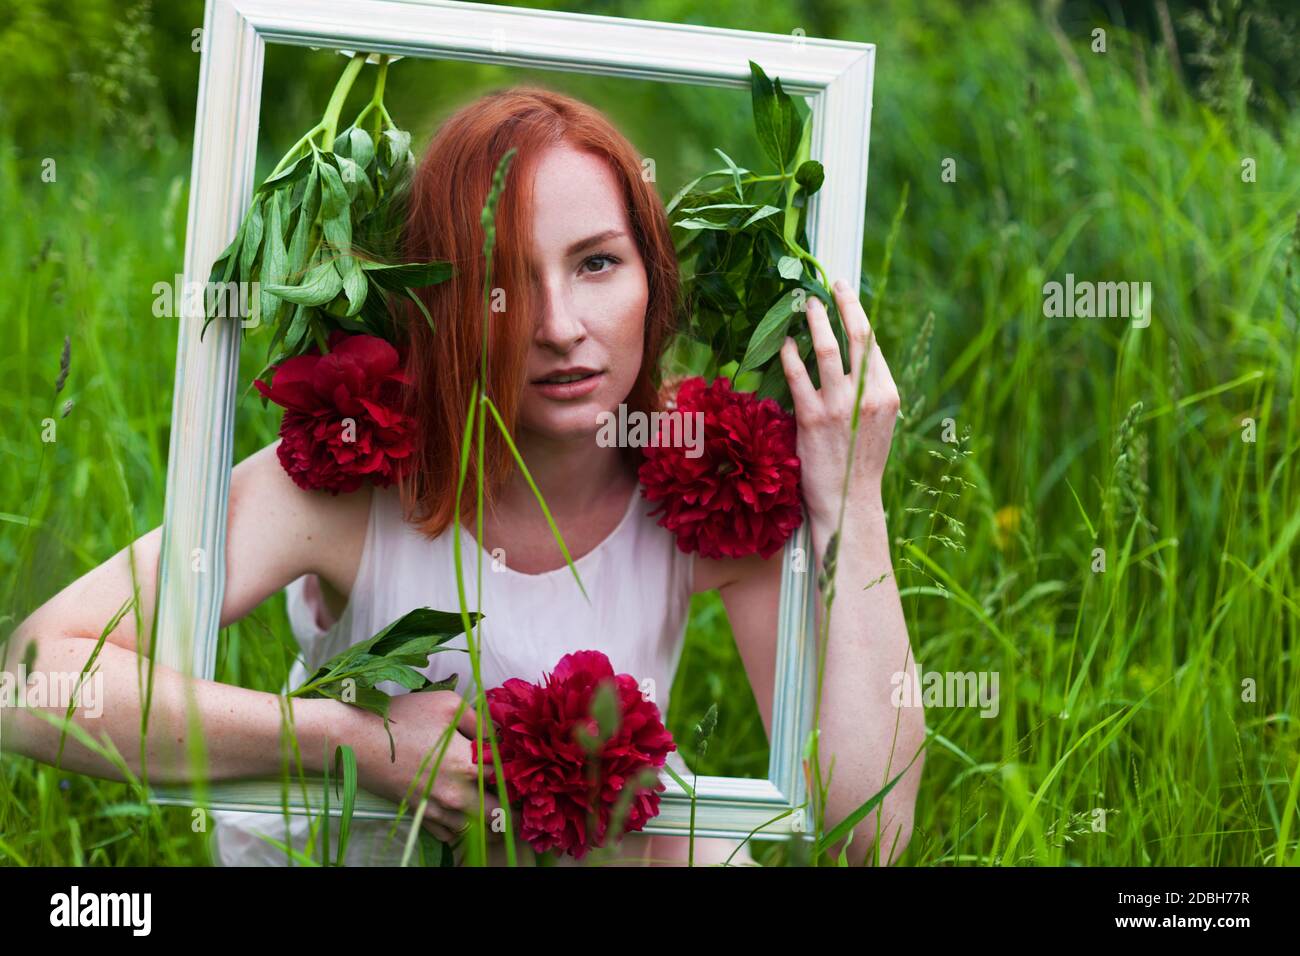 Redhead caucasian woman holding a picture frame decorated with red peony flowers. Wedding photozone concept. Stock Photo